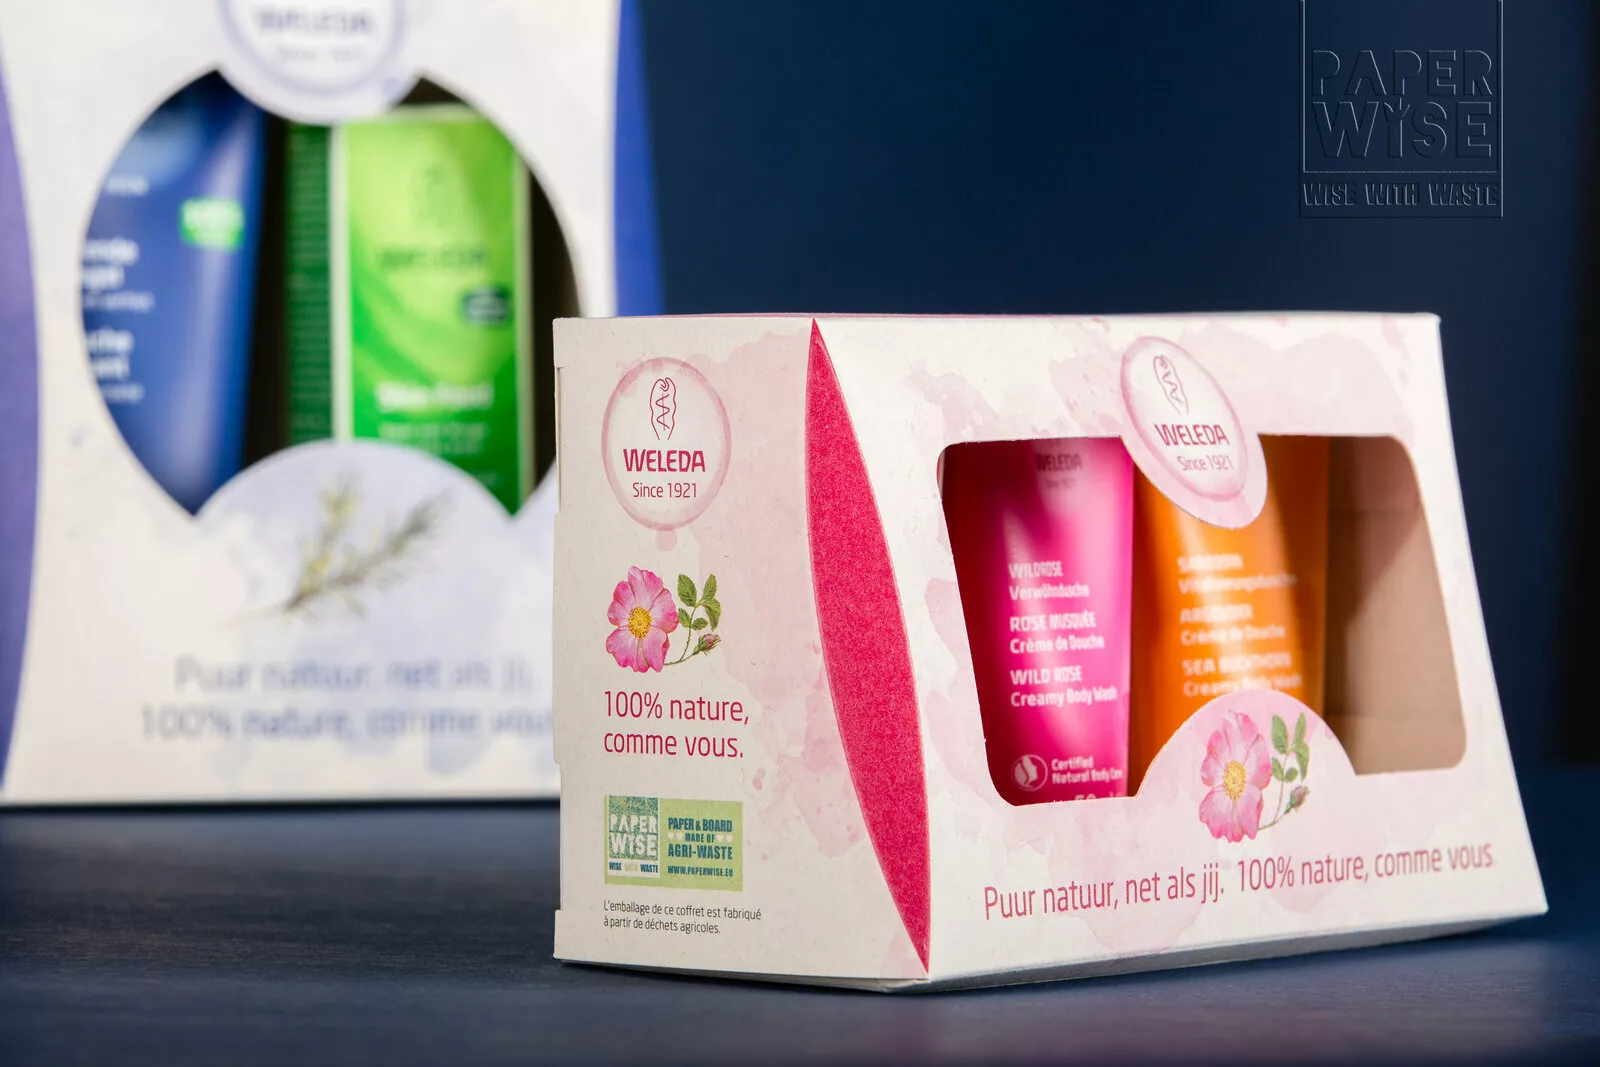 PaperWise sustainable paper eco friendly board gift packaging cosmetic beauty soap cream body care Weleda5